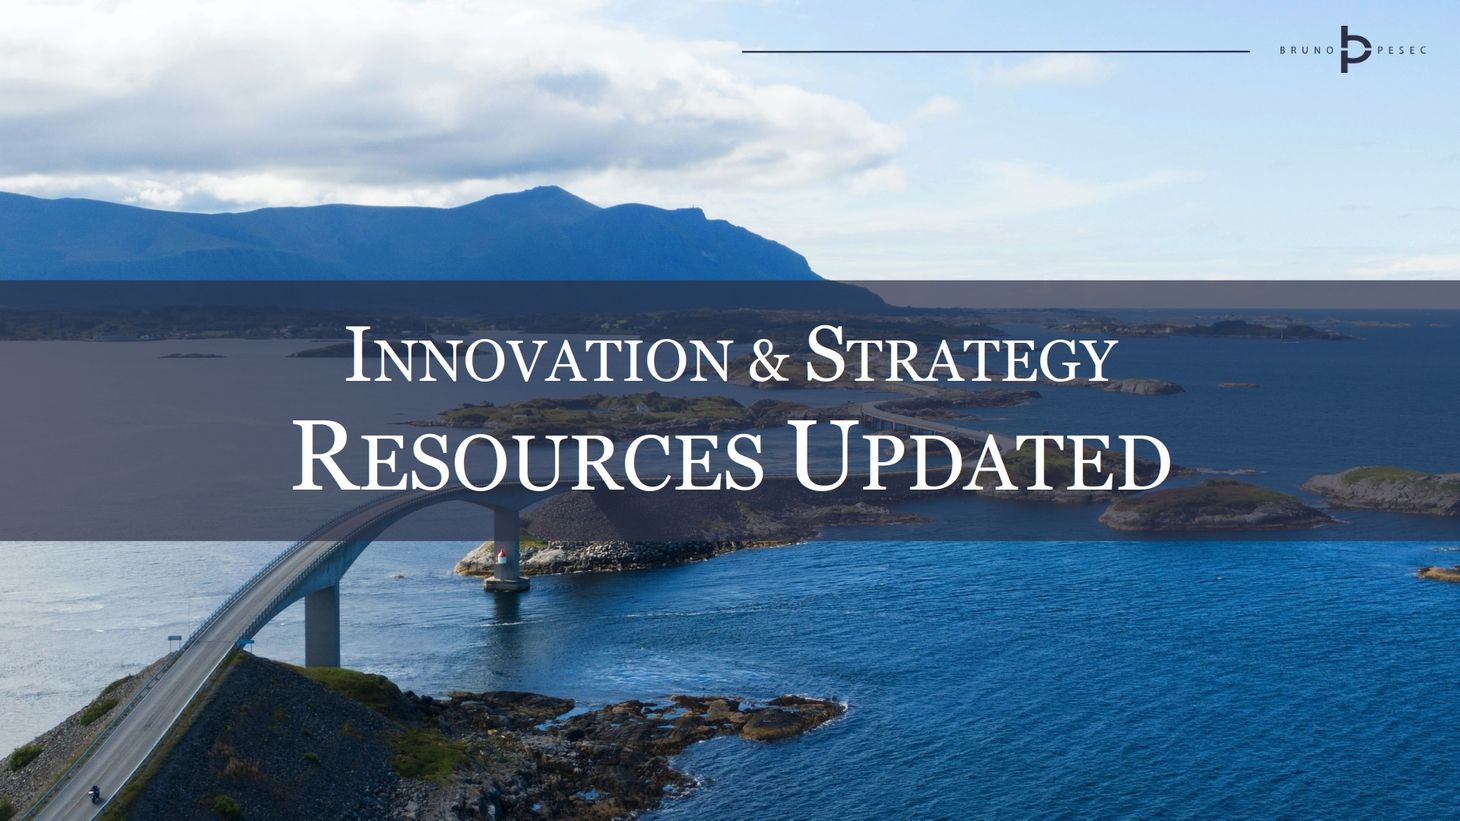 Innovation & strategy resources updated